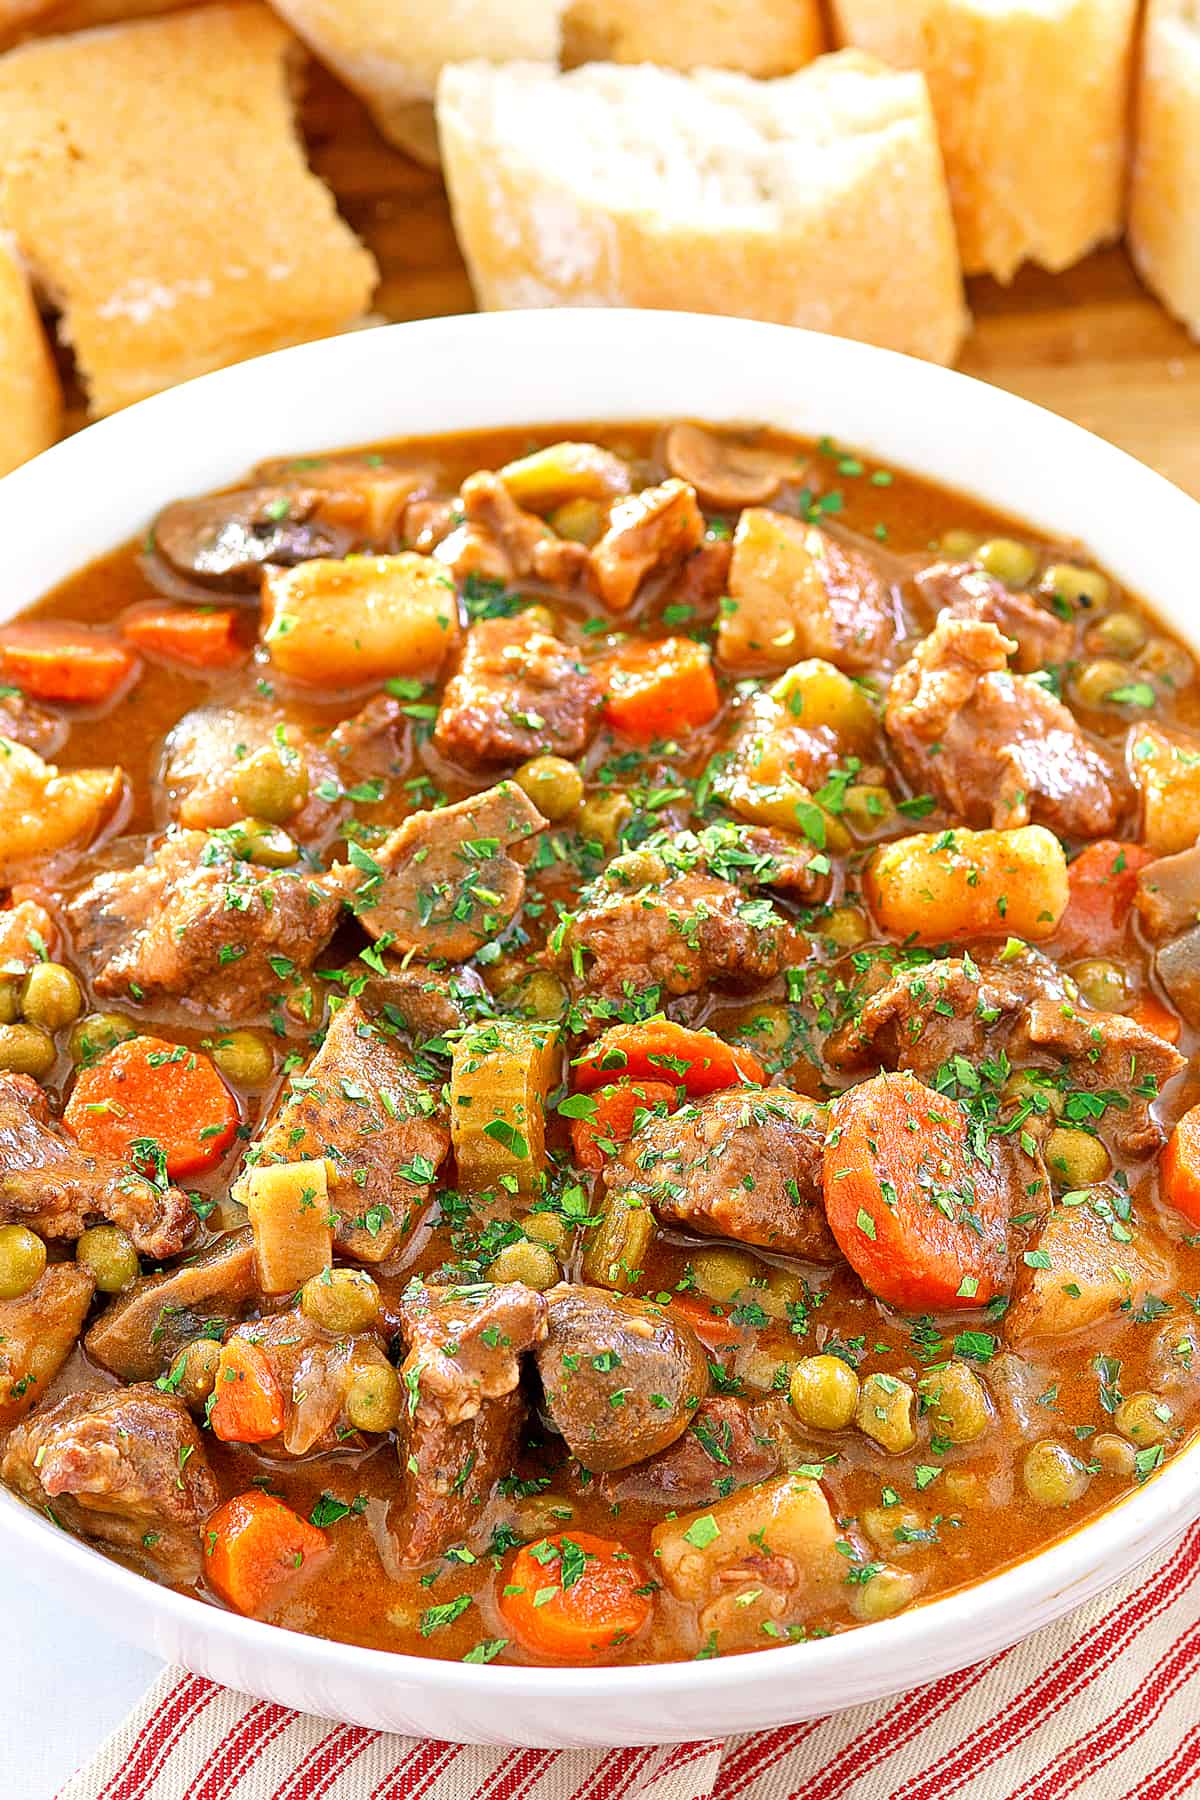 old fashioned beef stew recipe best classic red wine vegetables peas potatoes carrots